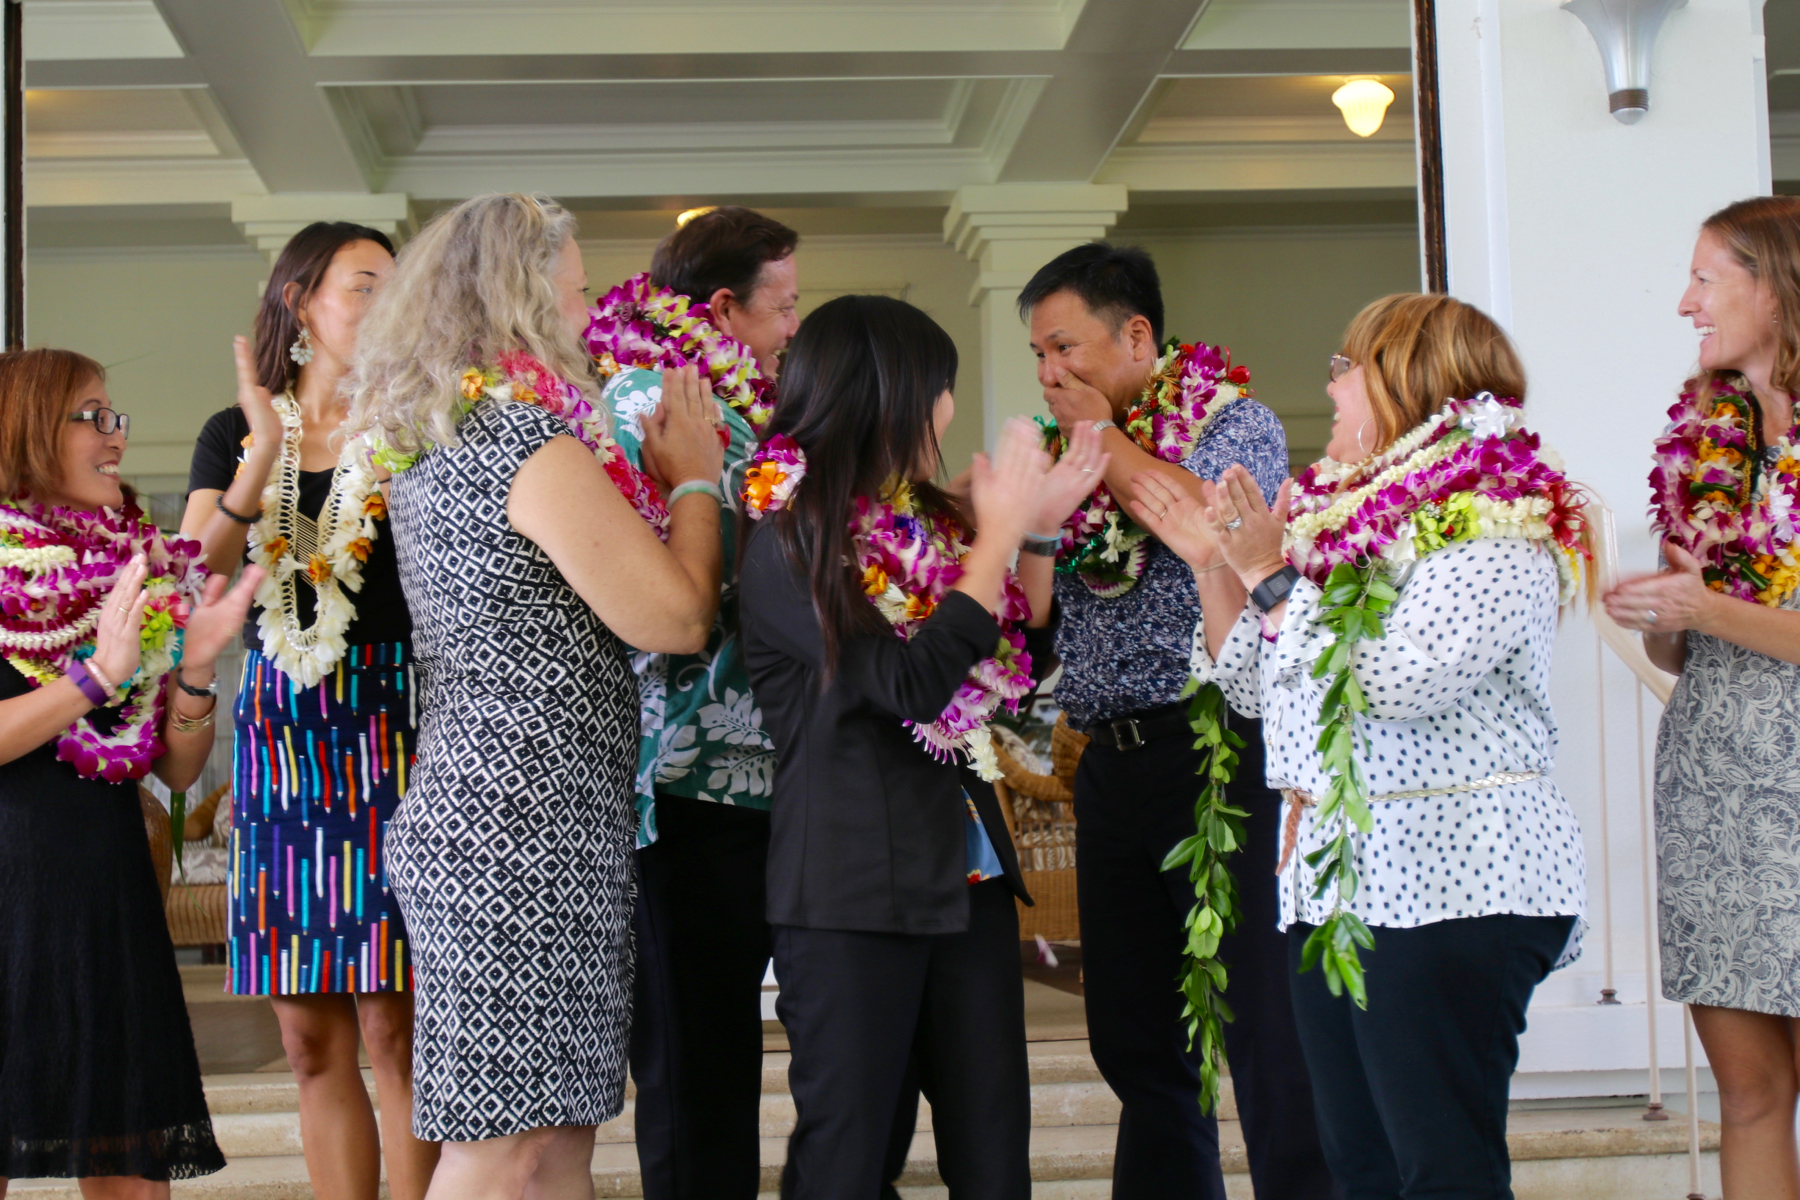 Maui’s Jennifer Suzuki (front right), a teacher at Maui Waena Intermediate School was named the Maui District Teacher of the Year by the state Department of Education. She was one of eight teachers across the state that were considered for the 2017 State Teacher of the Year honor. 